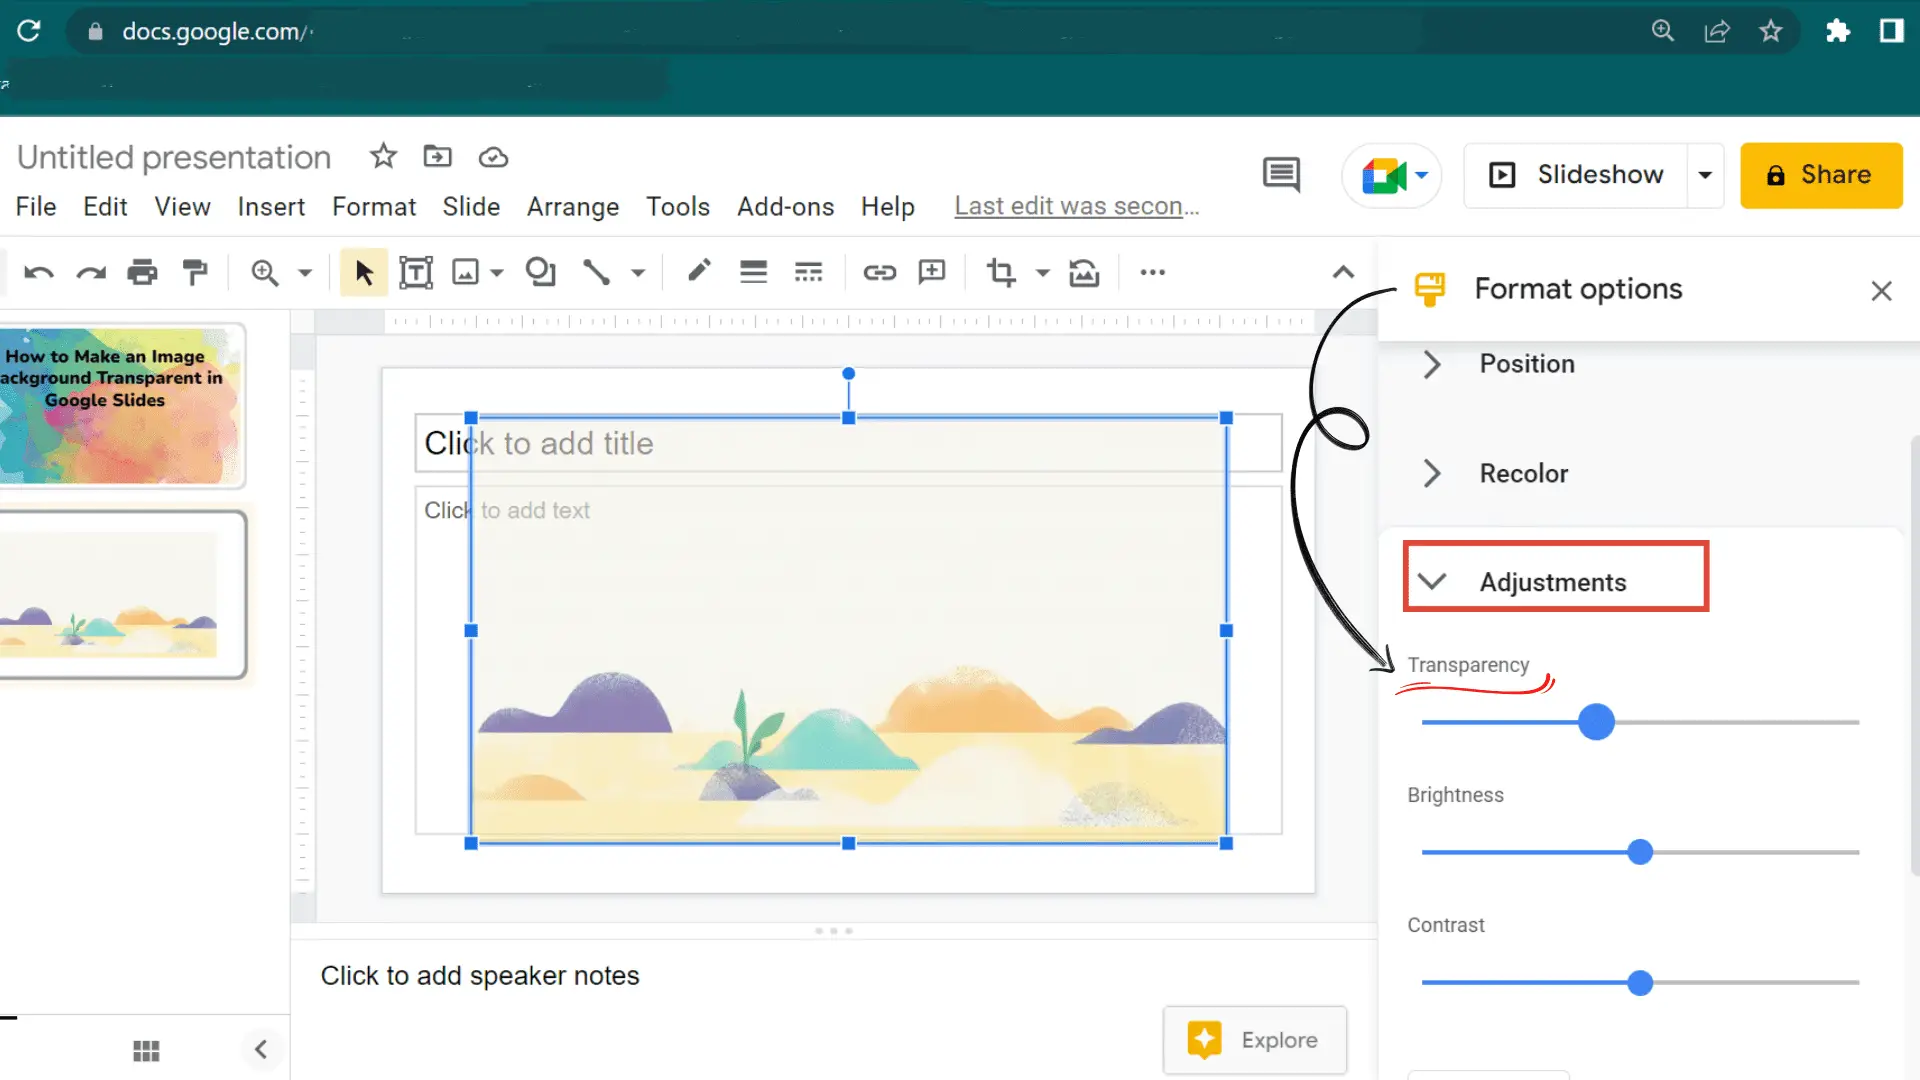 How To Make An Image Transparent In Google Slides